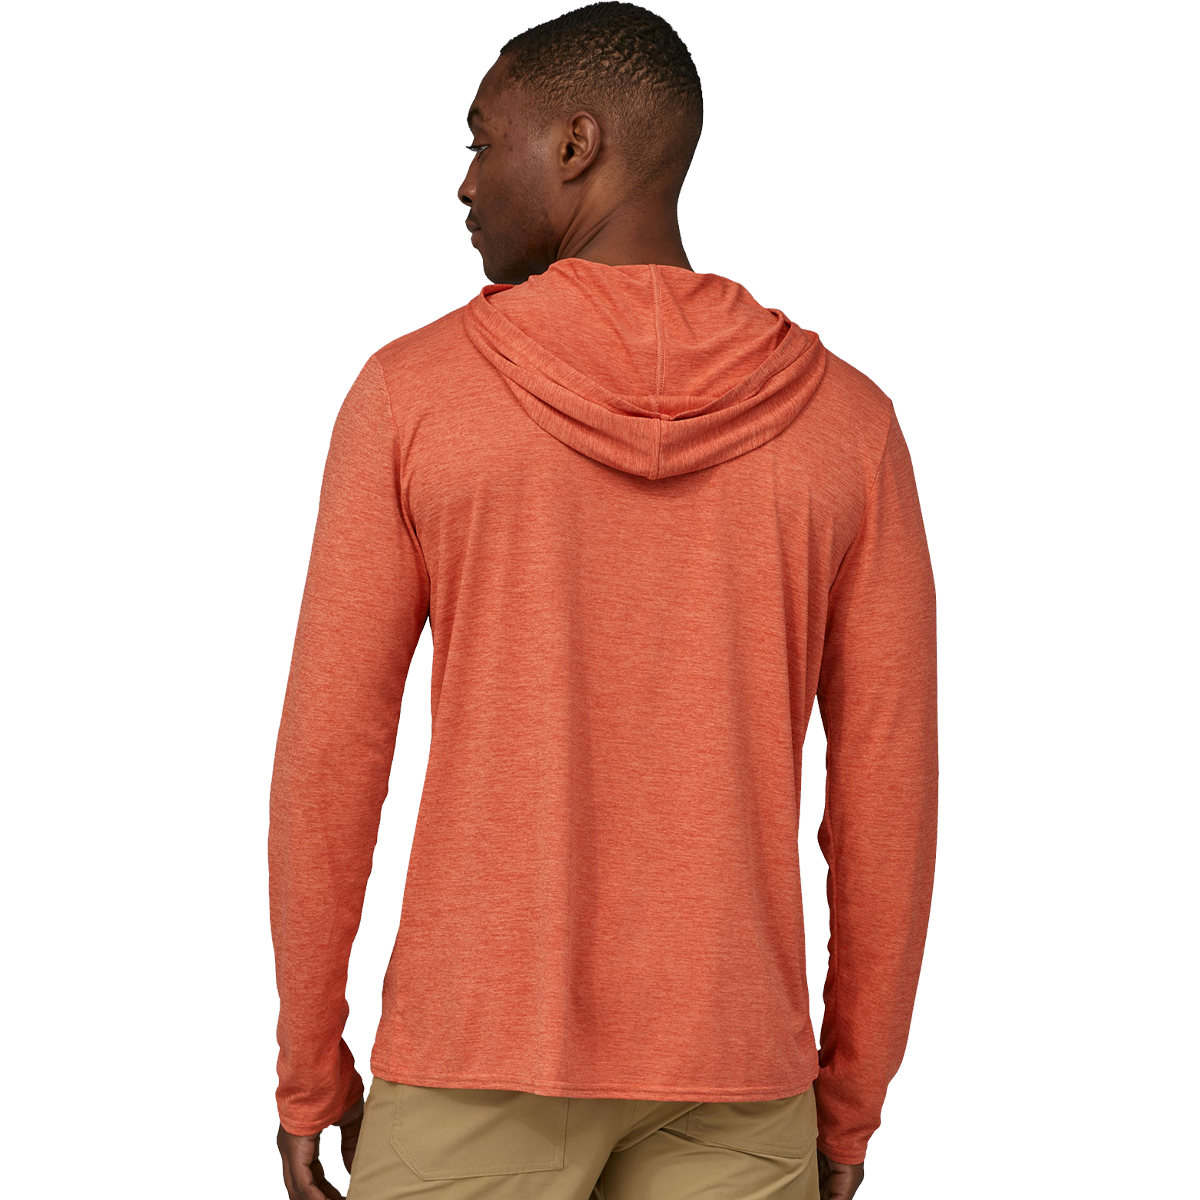 Men's Capilene Cool Daily Graphic Relaxed Fit Hoody alternate view